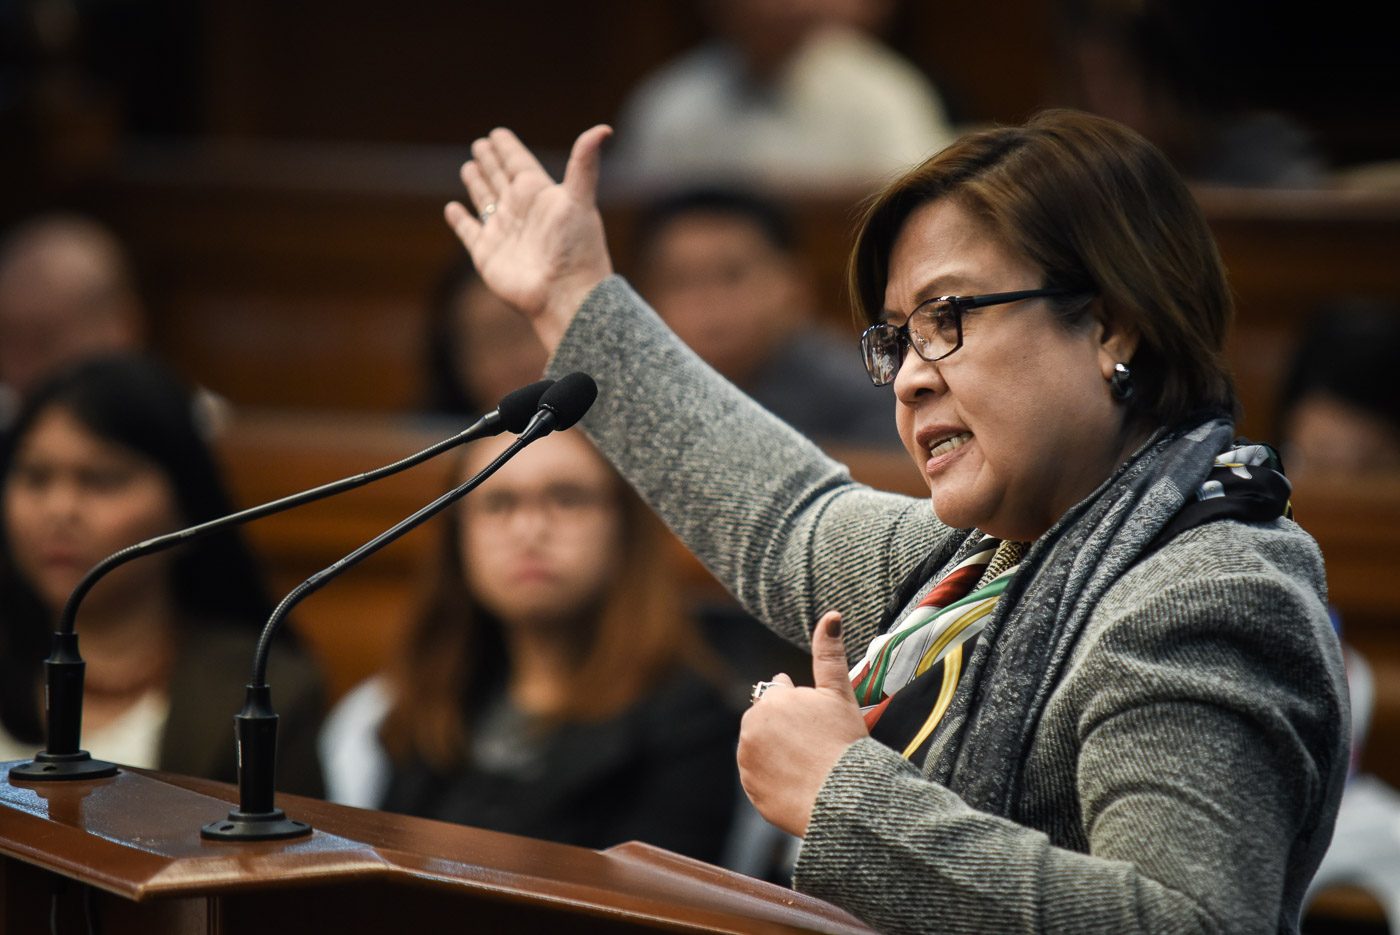 De Lima: ‘Lone’ voice amplified by churches, schools